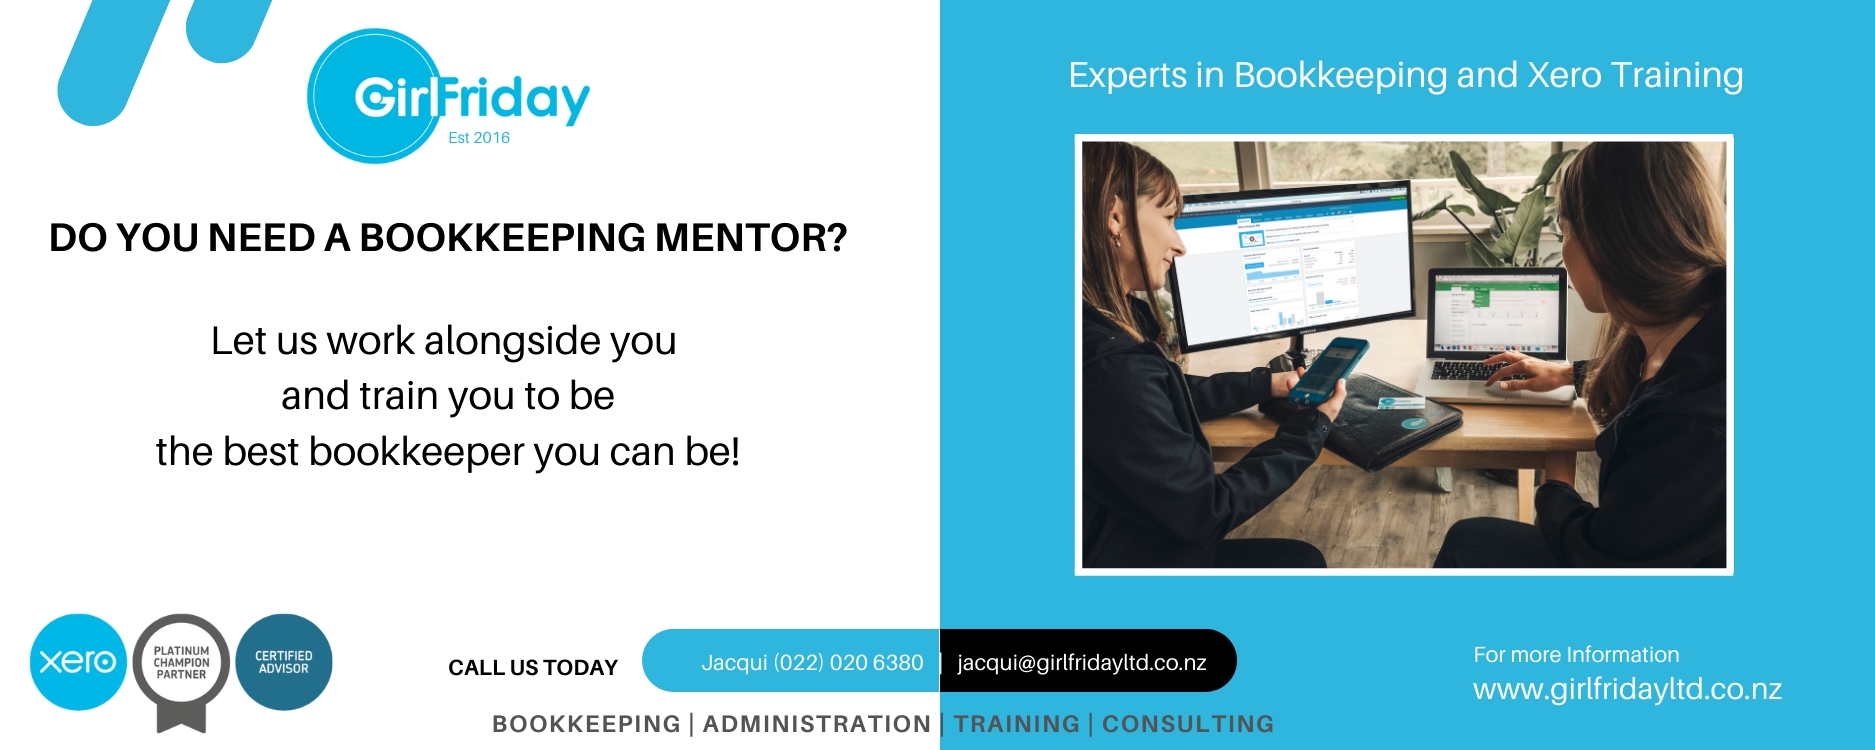 DO YOU NEED A BOOKKEEPING MENTOR? We